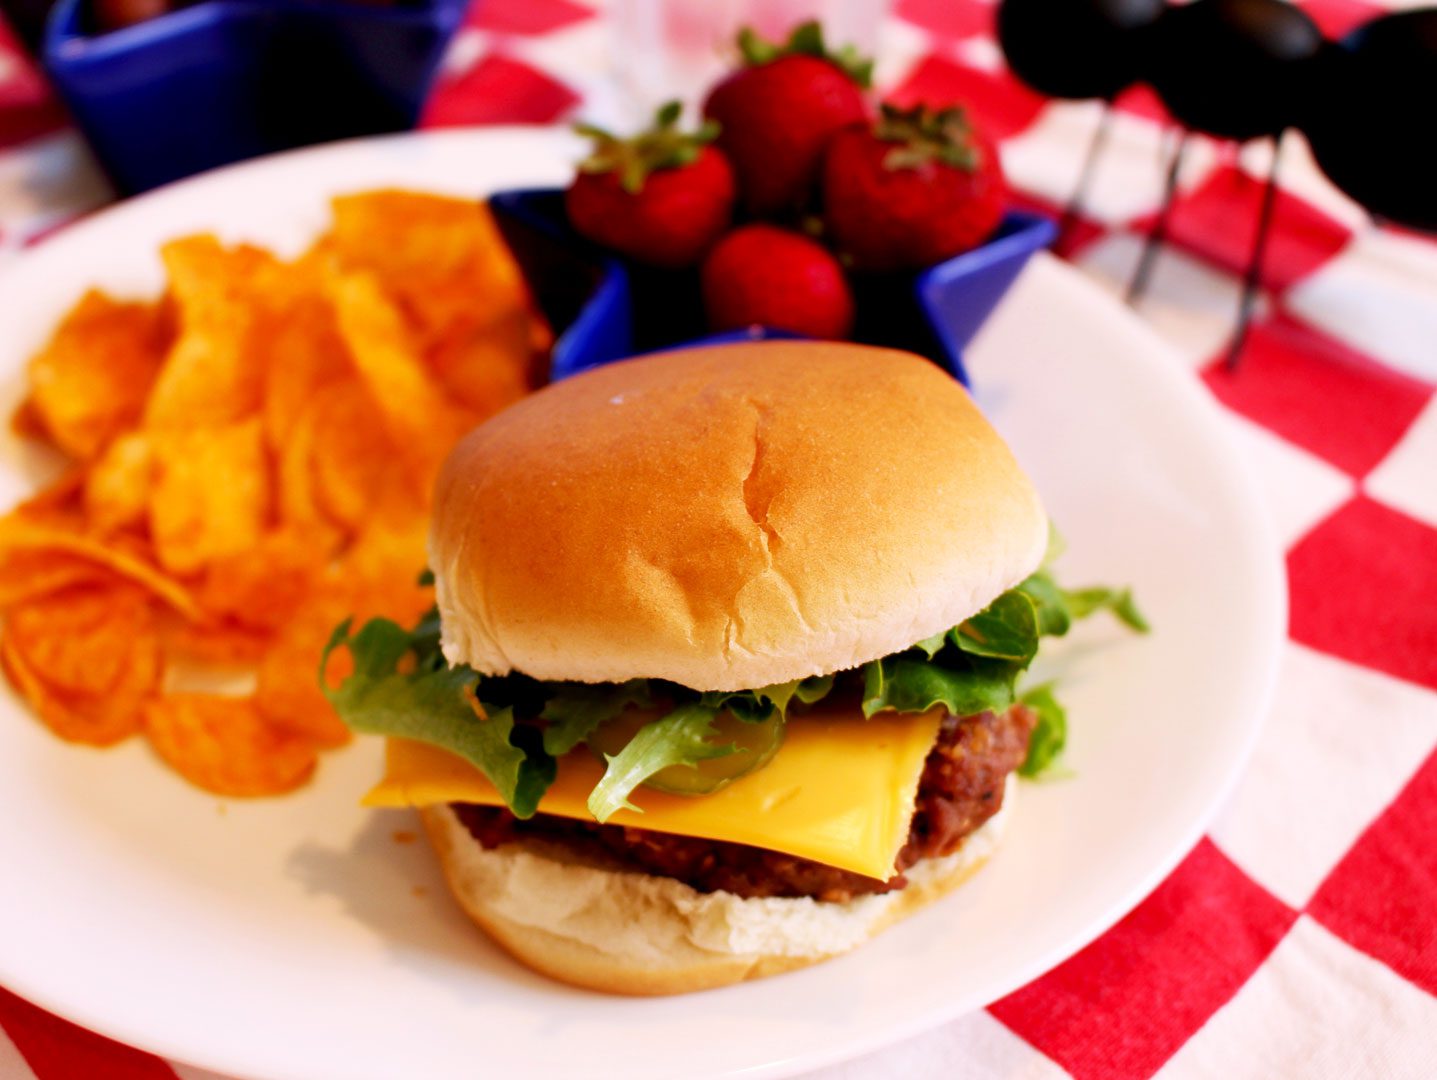 Celebrate July 4th with Tender Grilled Papa Burgers! - Welcome To